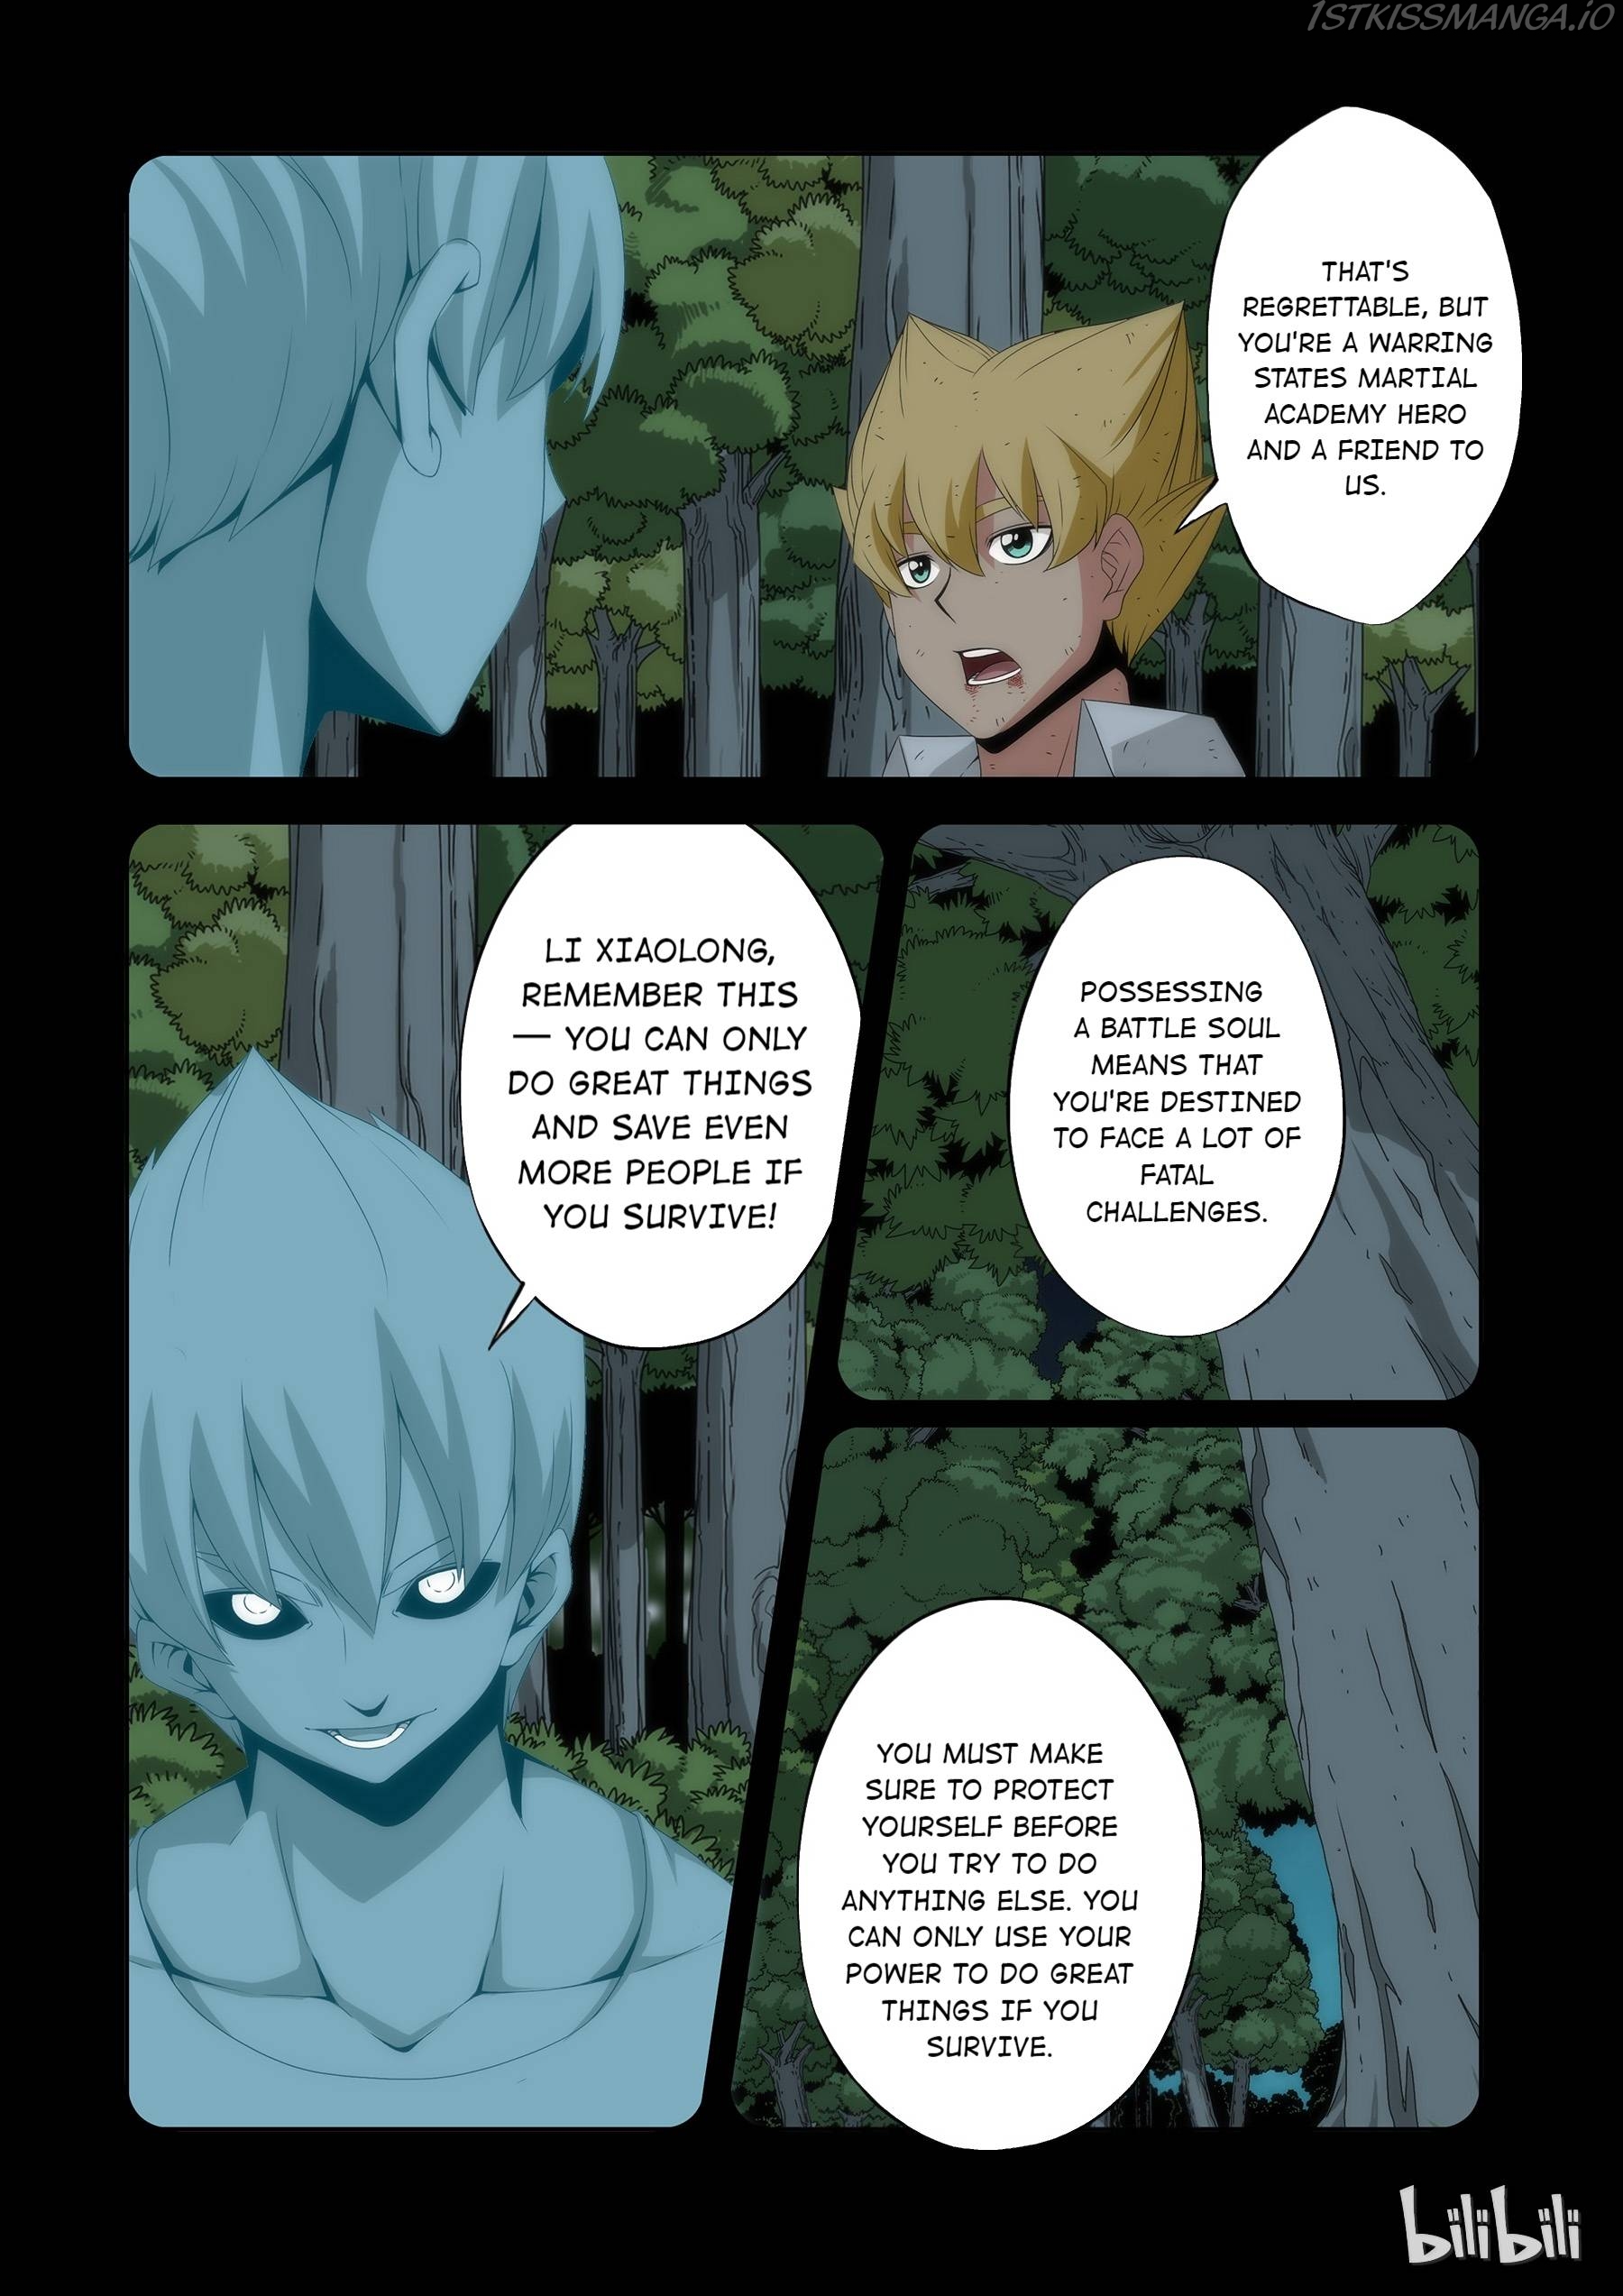 Warring States Martial Academy Chapter 65 - Page 6